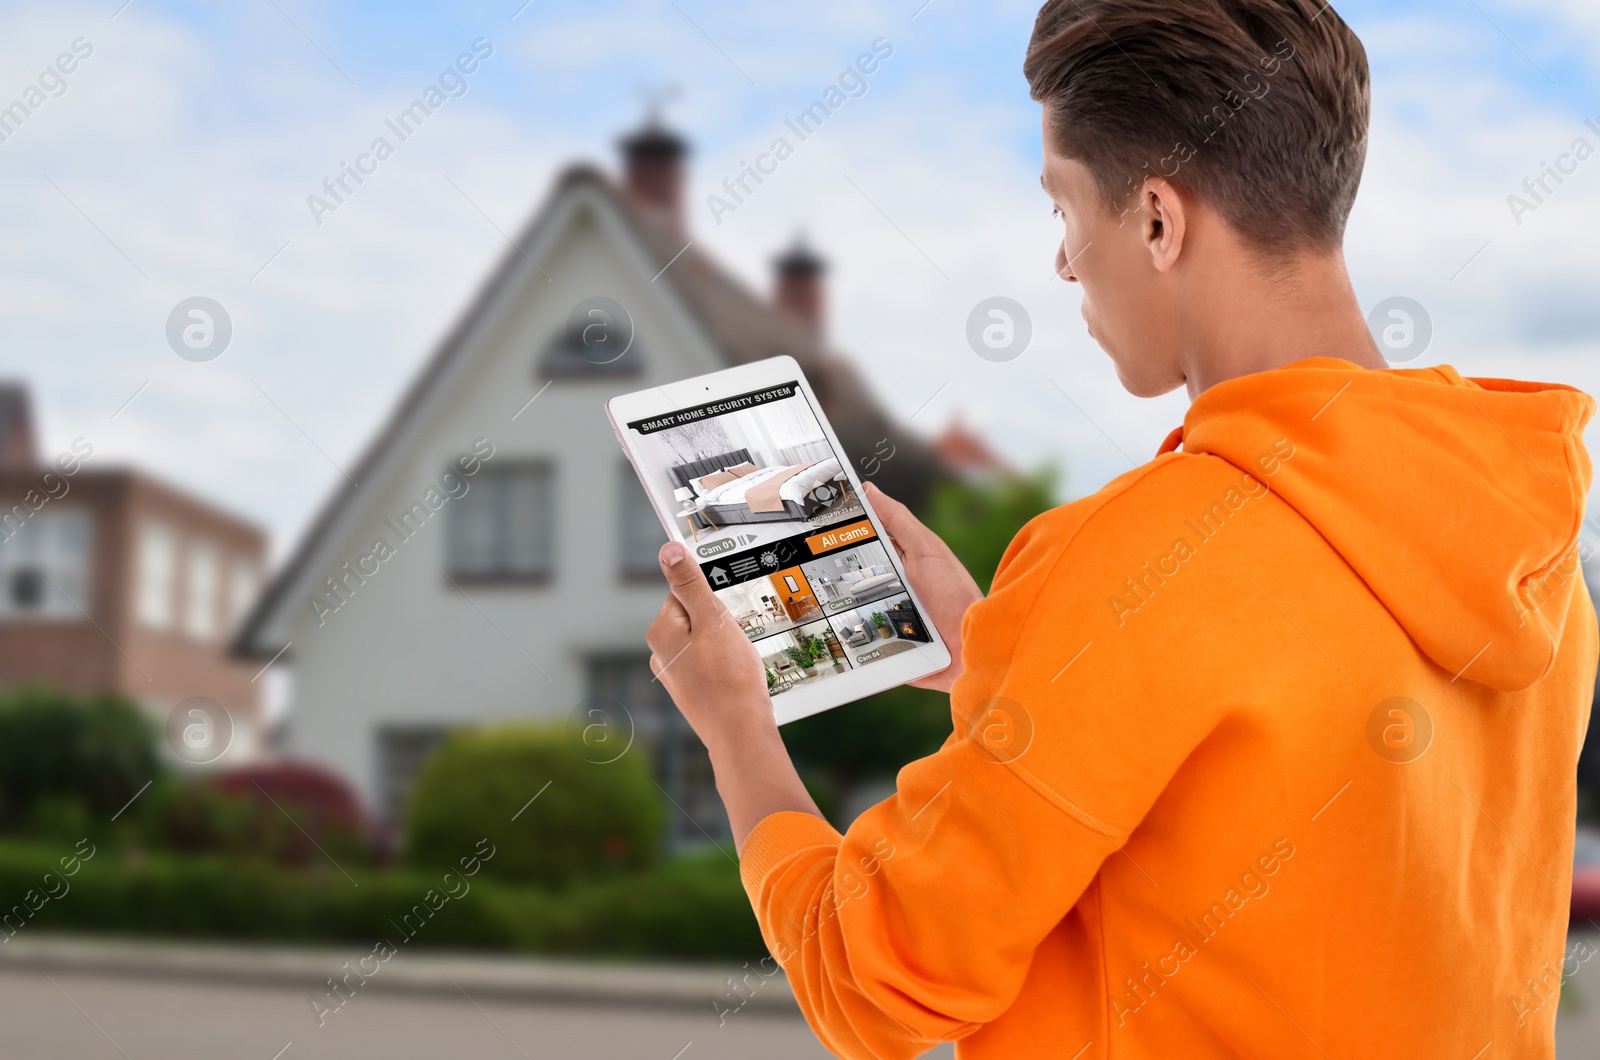 Image of Man using smart home security system on tablet computer near house outdoors. Device showing different rooms through cameras